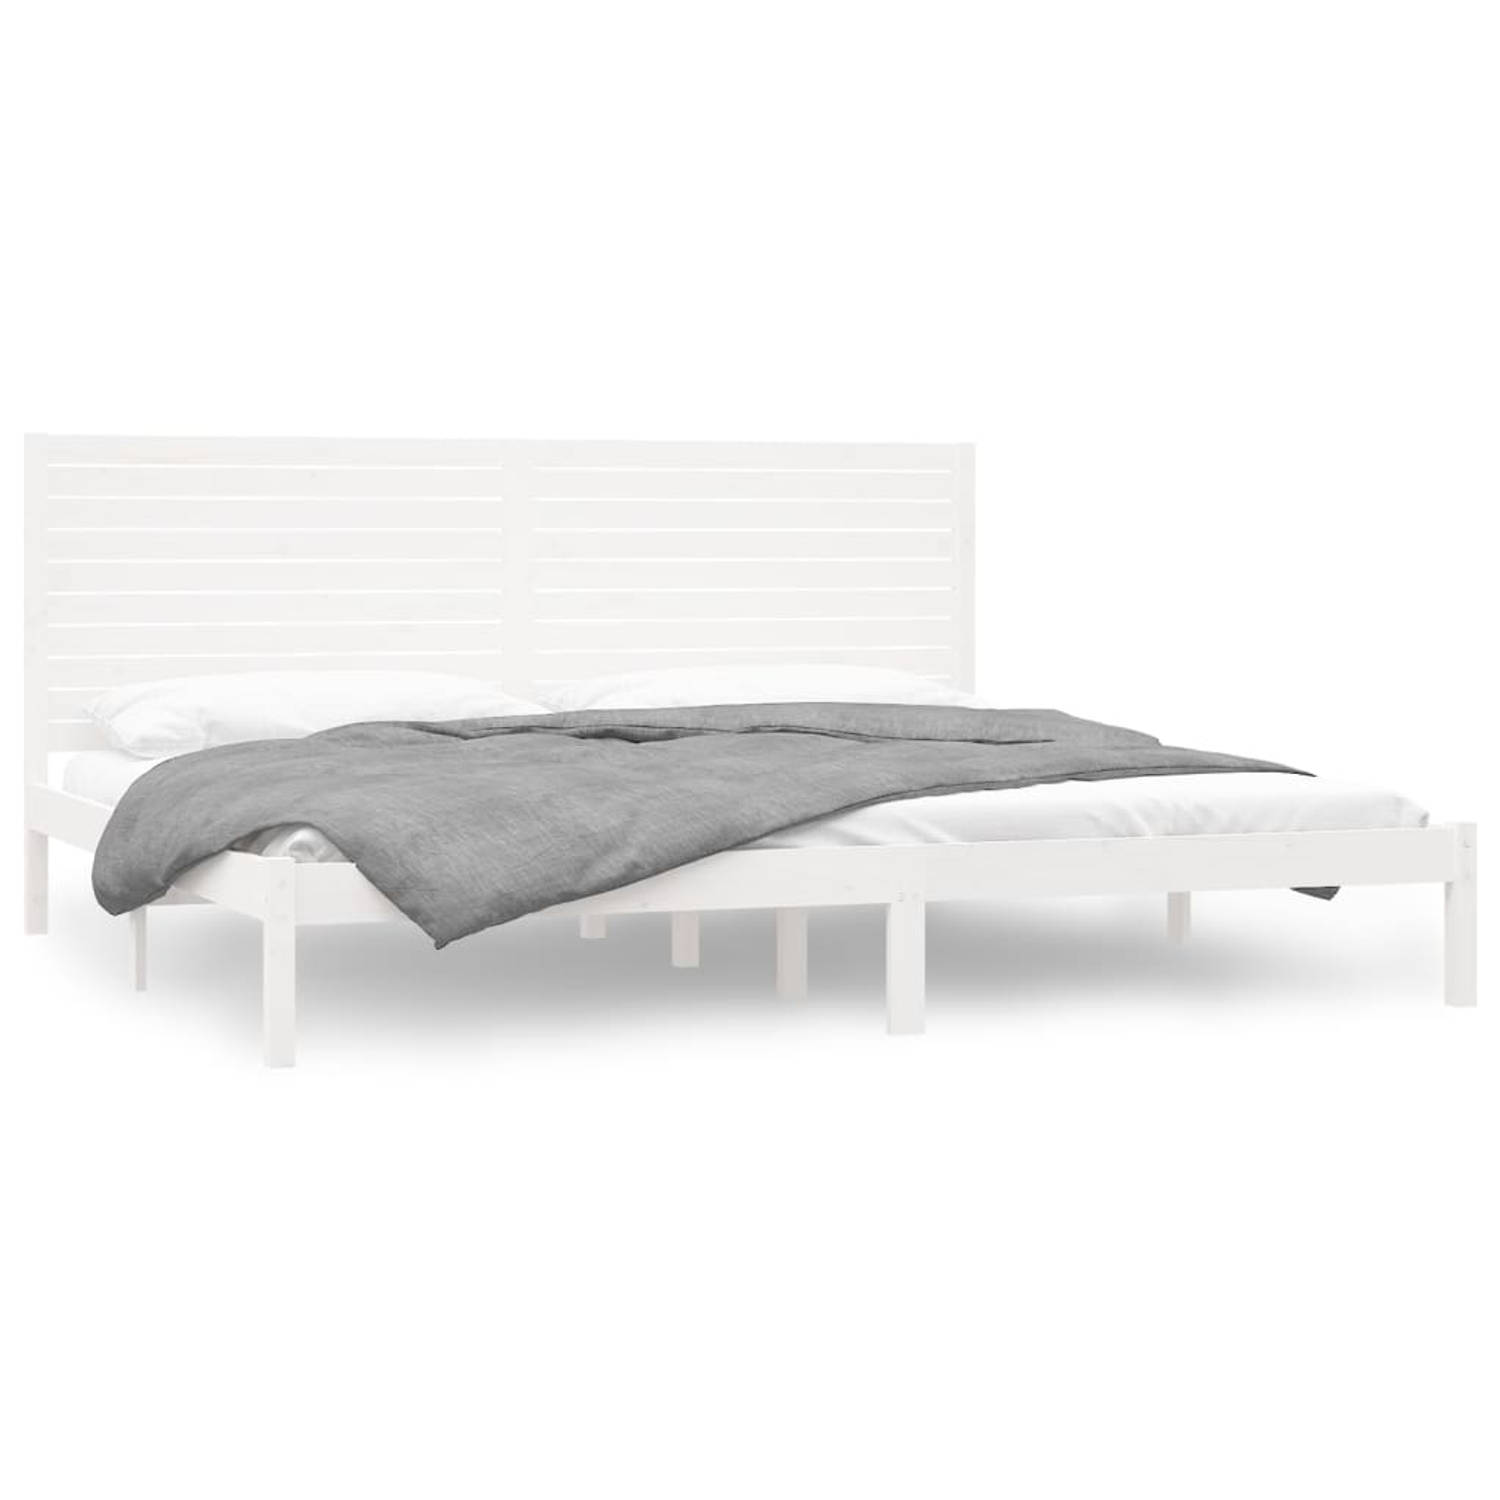 The Living Store Bedframe massief hout wit 200x200 cm - Bedframe - Bedframes - Tweepersoonsbed - Bed - Bedombouw - Dubbel Bed - Frame - Bed Frame - Ledikant - Bedframe Met Hoofdein